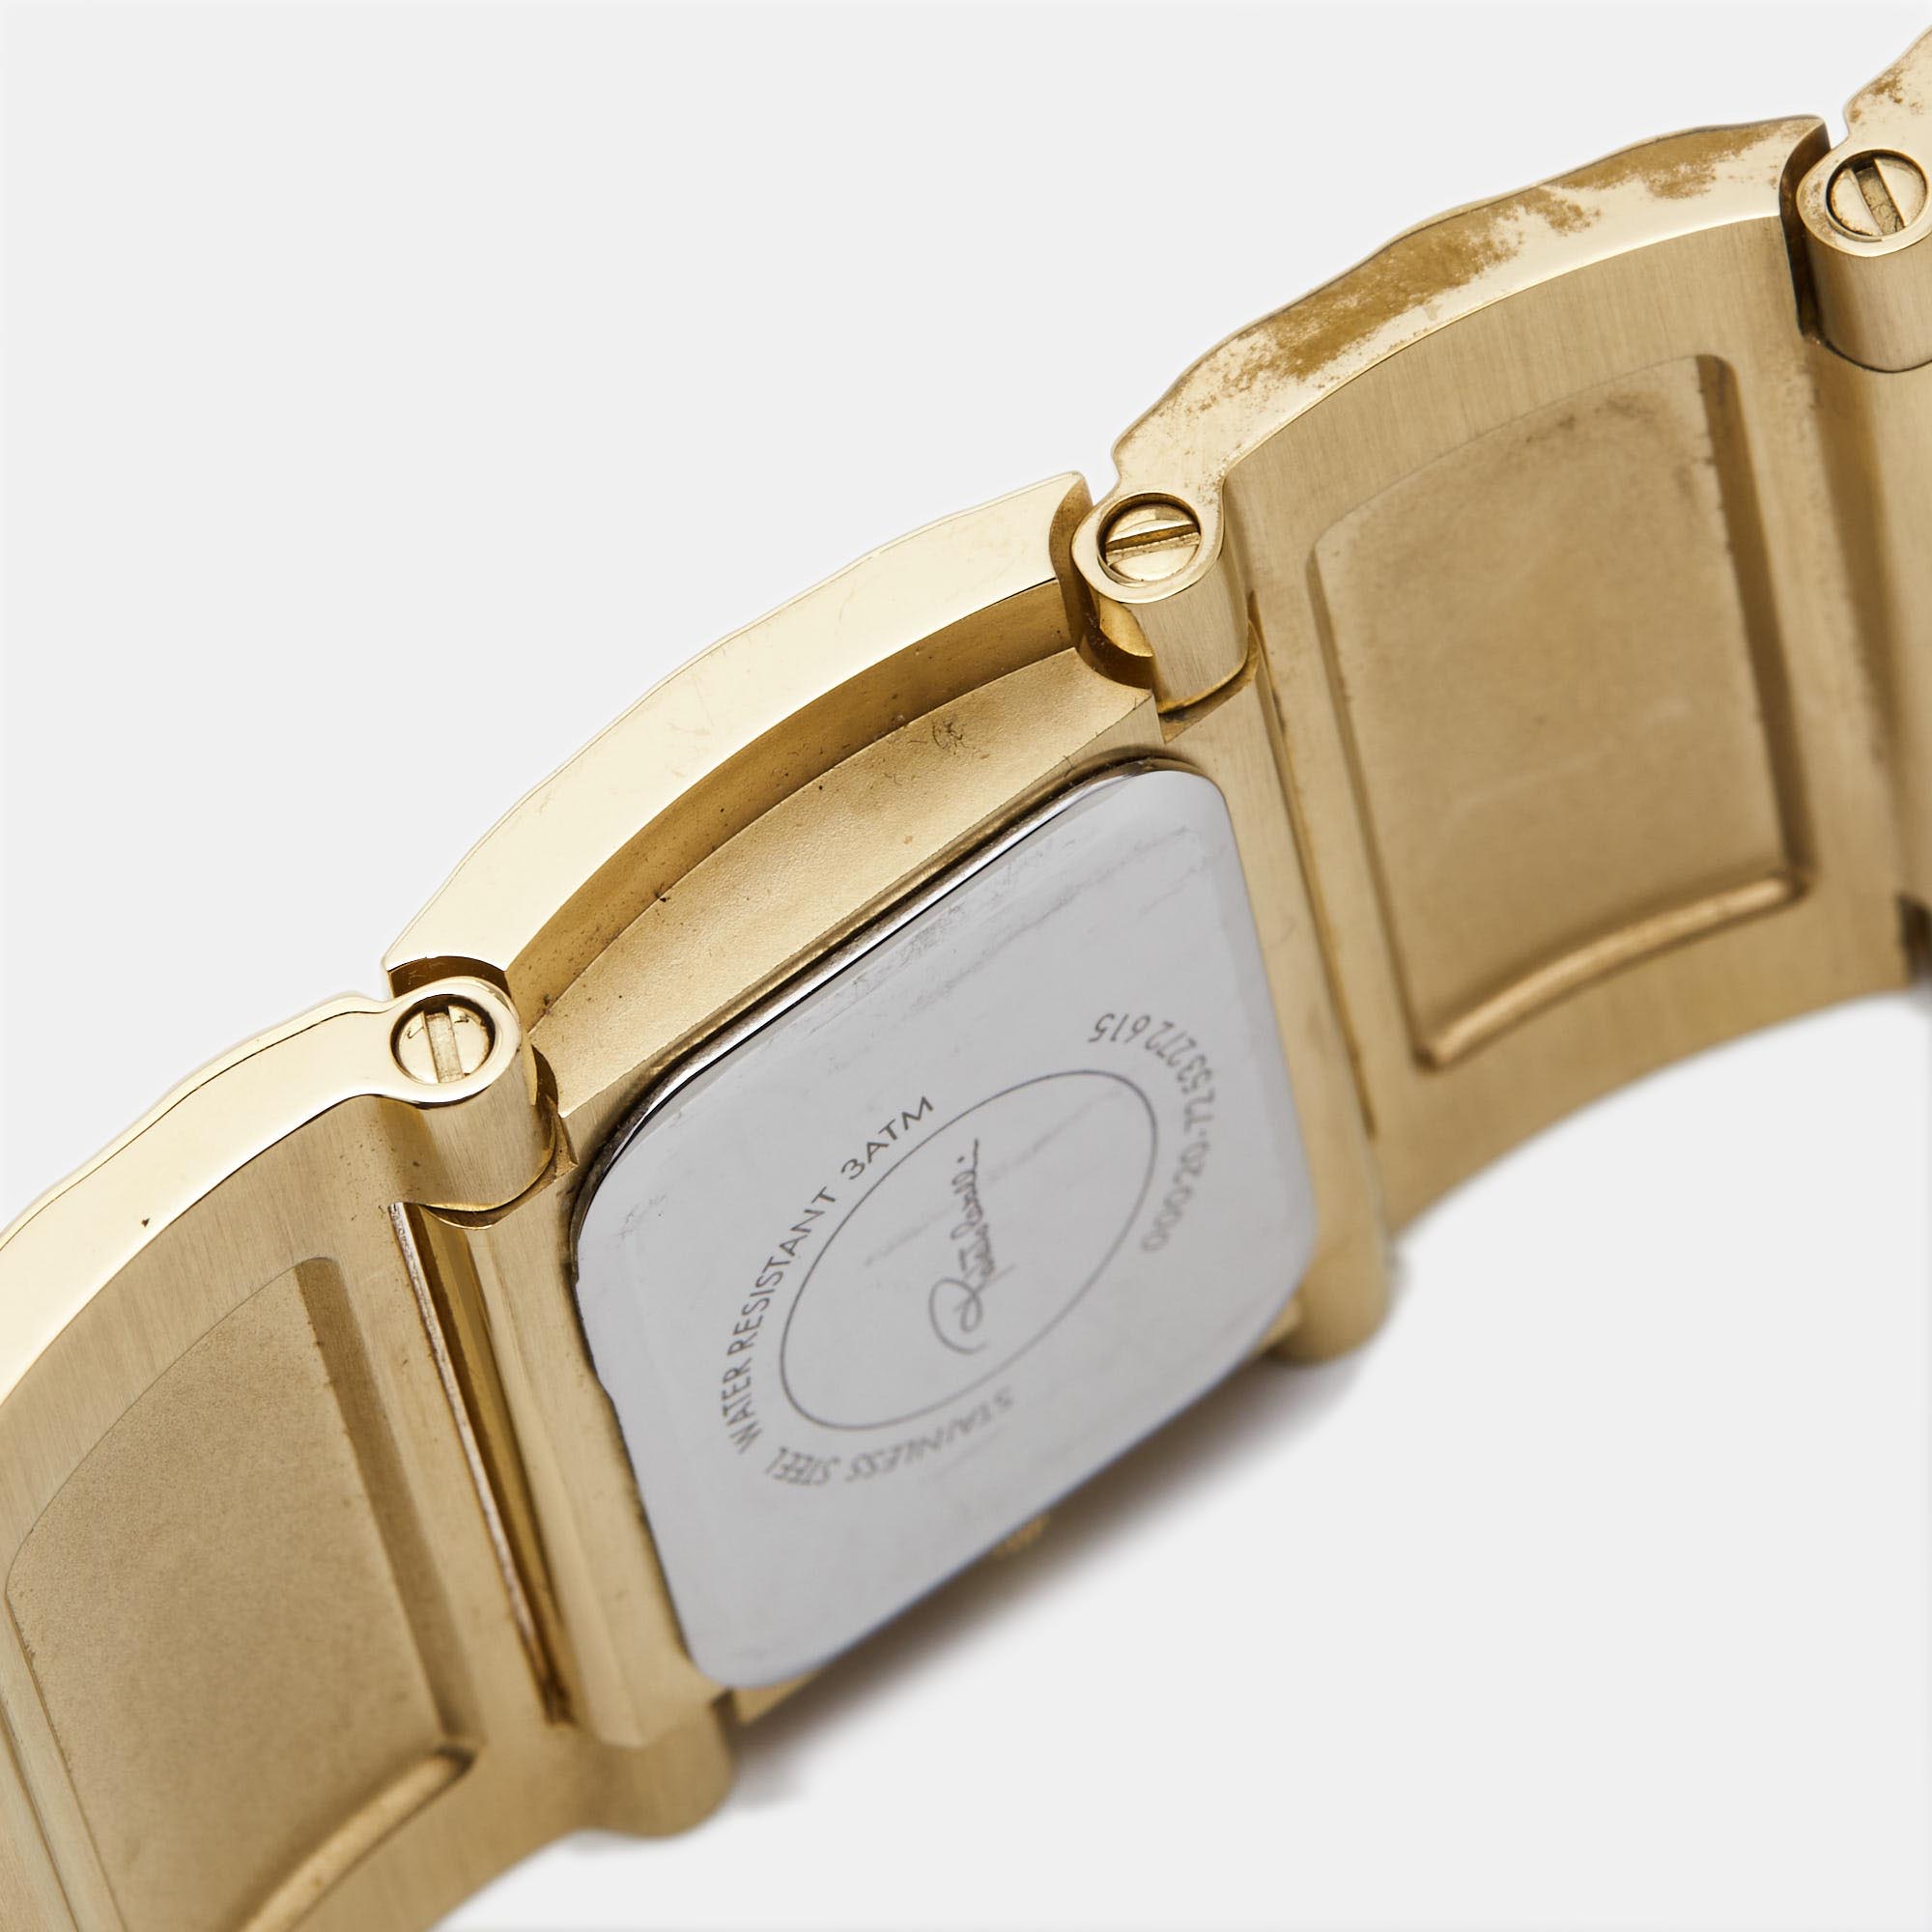 Roberto Cavalli Champagne Gold Plated Stainless Steel 7253272615 Women's Wristwatch 38 Mm